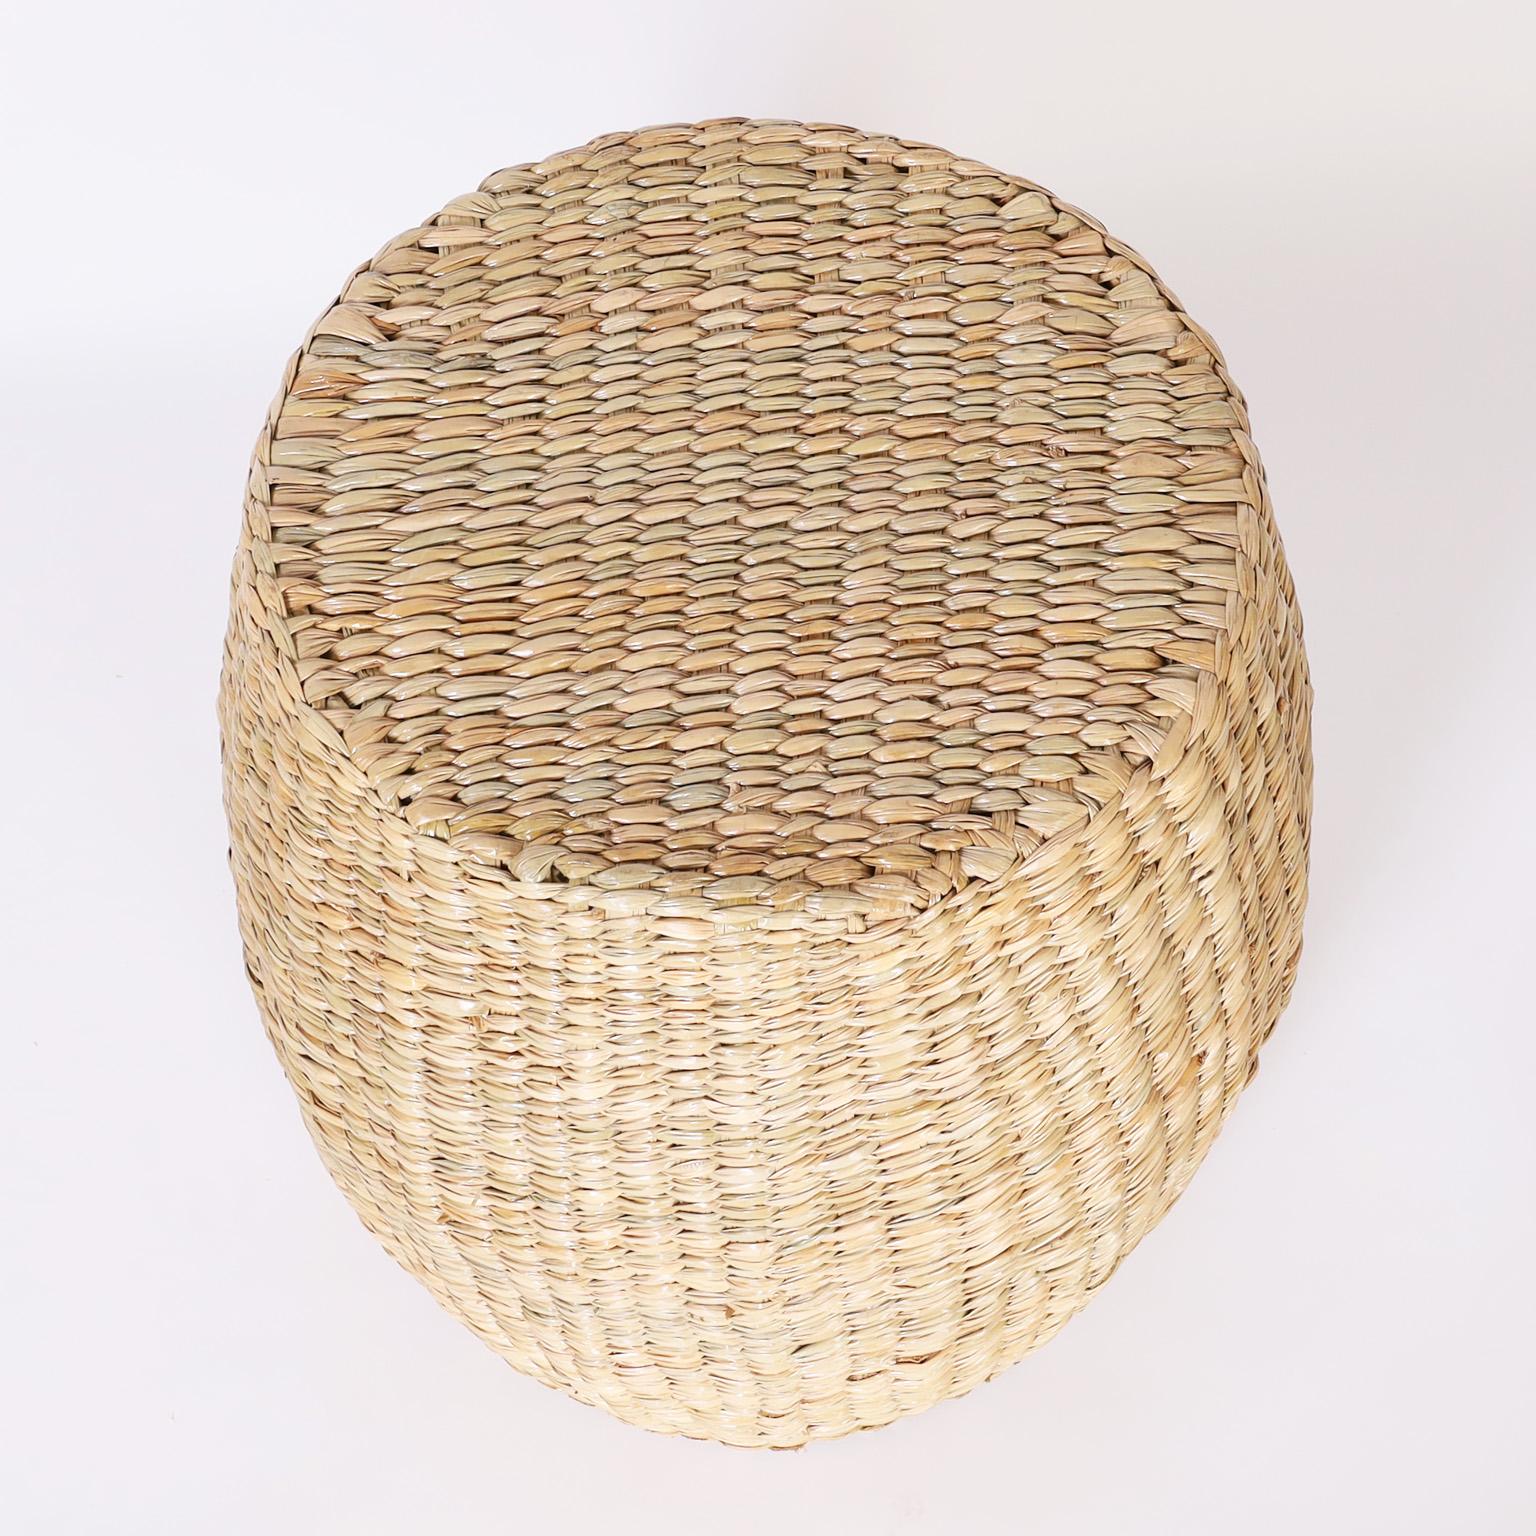 Mexican Pair of Wicker Chuspata Garden Seats from the FS Flores Collection